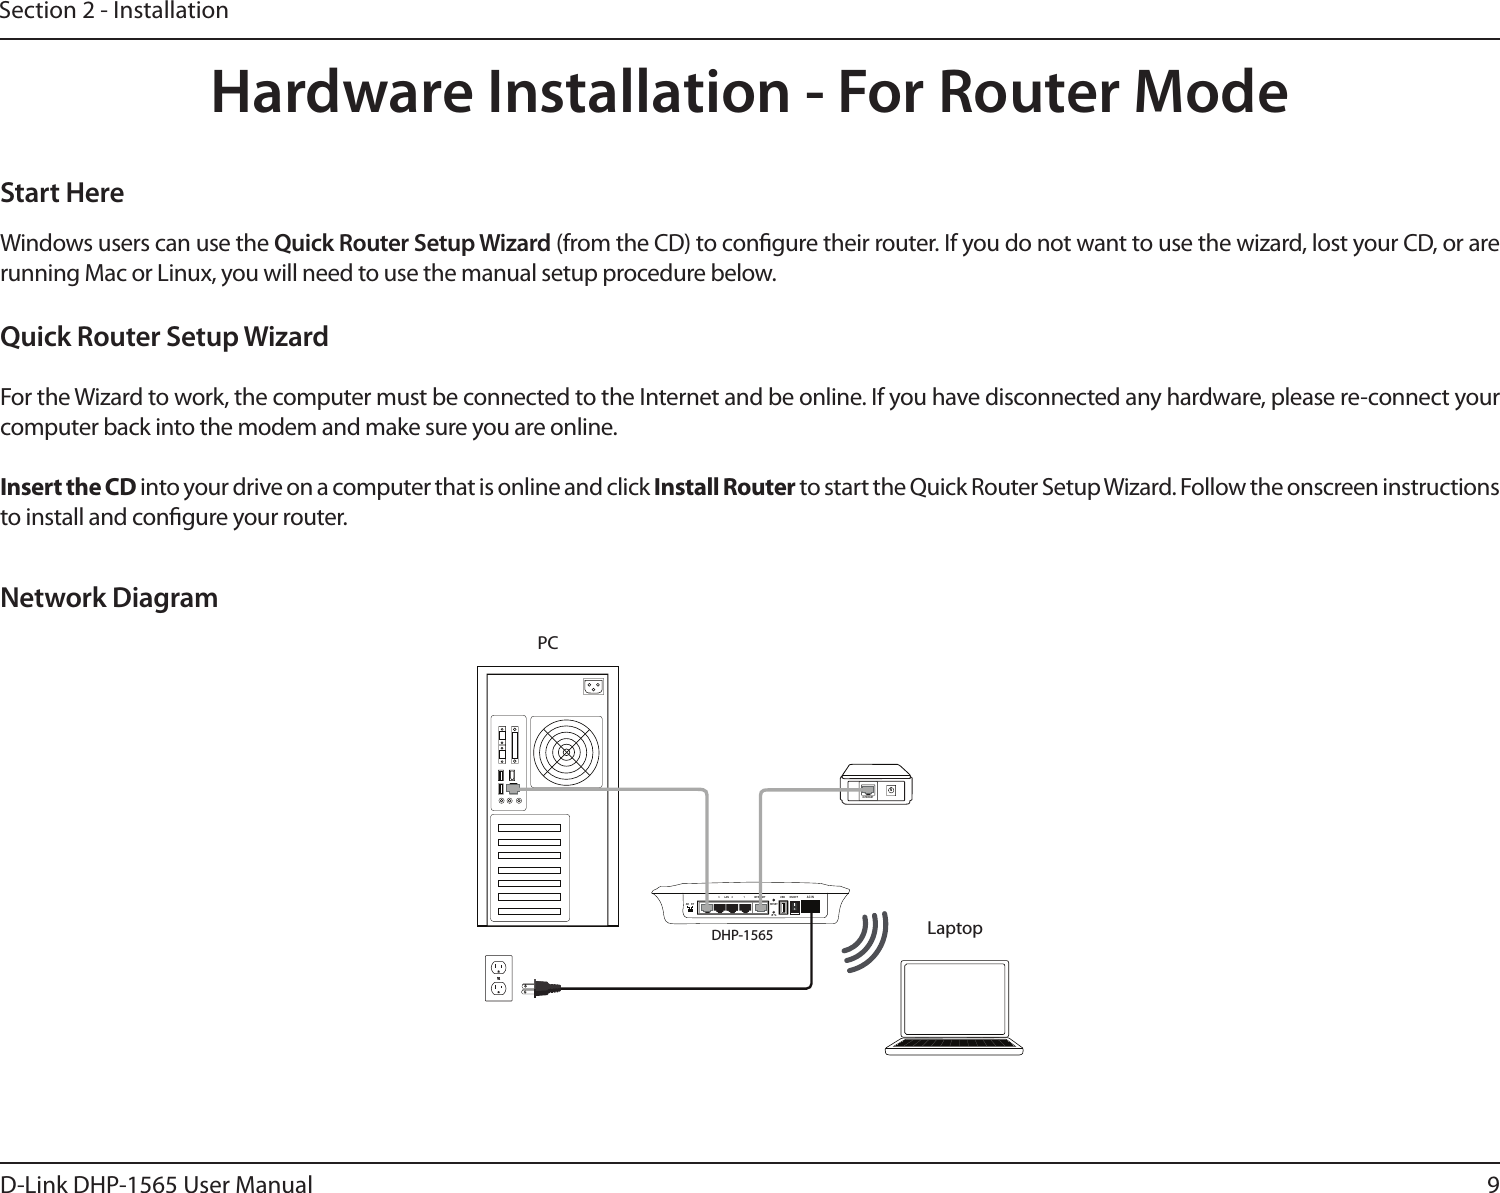 9D-Link DHP-1565 User ManualSection 2 - InstallationHardware Installation - For Router ModeNetwork DiagramWindows users can use the Quick Router Setup Wizard (from the CD) to congure their router. If you do not want to use the wizard, lost your CD, or are running Mac or Linux, you will need to use the manual setup procedure below. Start HereQuick Router Setup WizardFor the Wizard to work, the computer must be connected to the Internet and be online. If you have disconnected any hardware, please re-connect your computer back into the modem and make sure you are online.Insert the CD into your drive on a computer that is online and click Install Router to start the Quick Router Setup Wizard. Follow the onscreen instructions to install and congure your router. Laptop1234 LAN INTERNETRESETON/OFFUSBAR RTAC ININTERNETDHP-1565PC